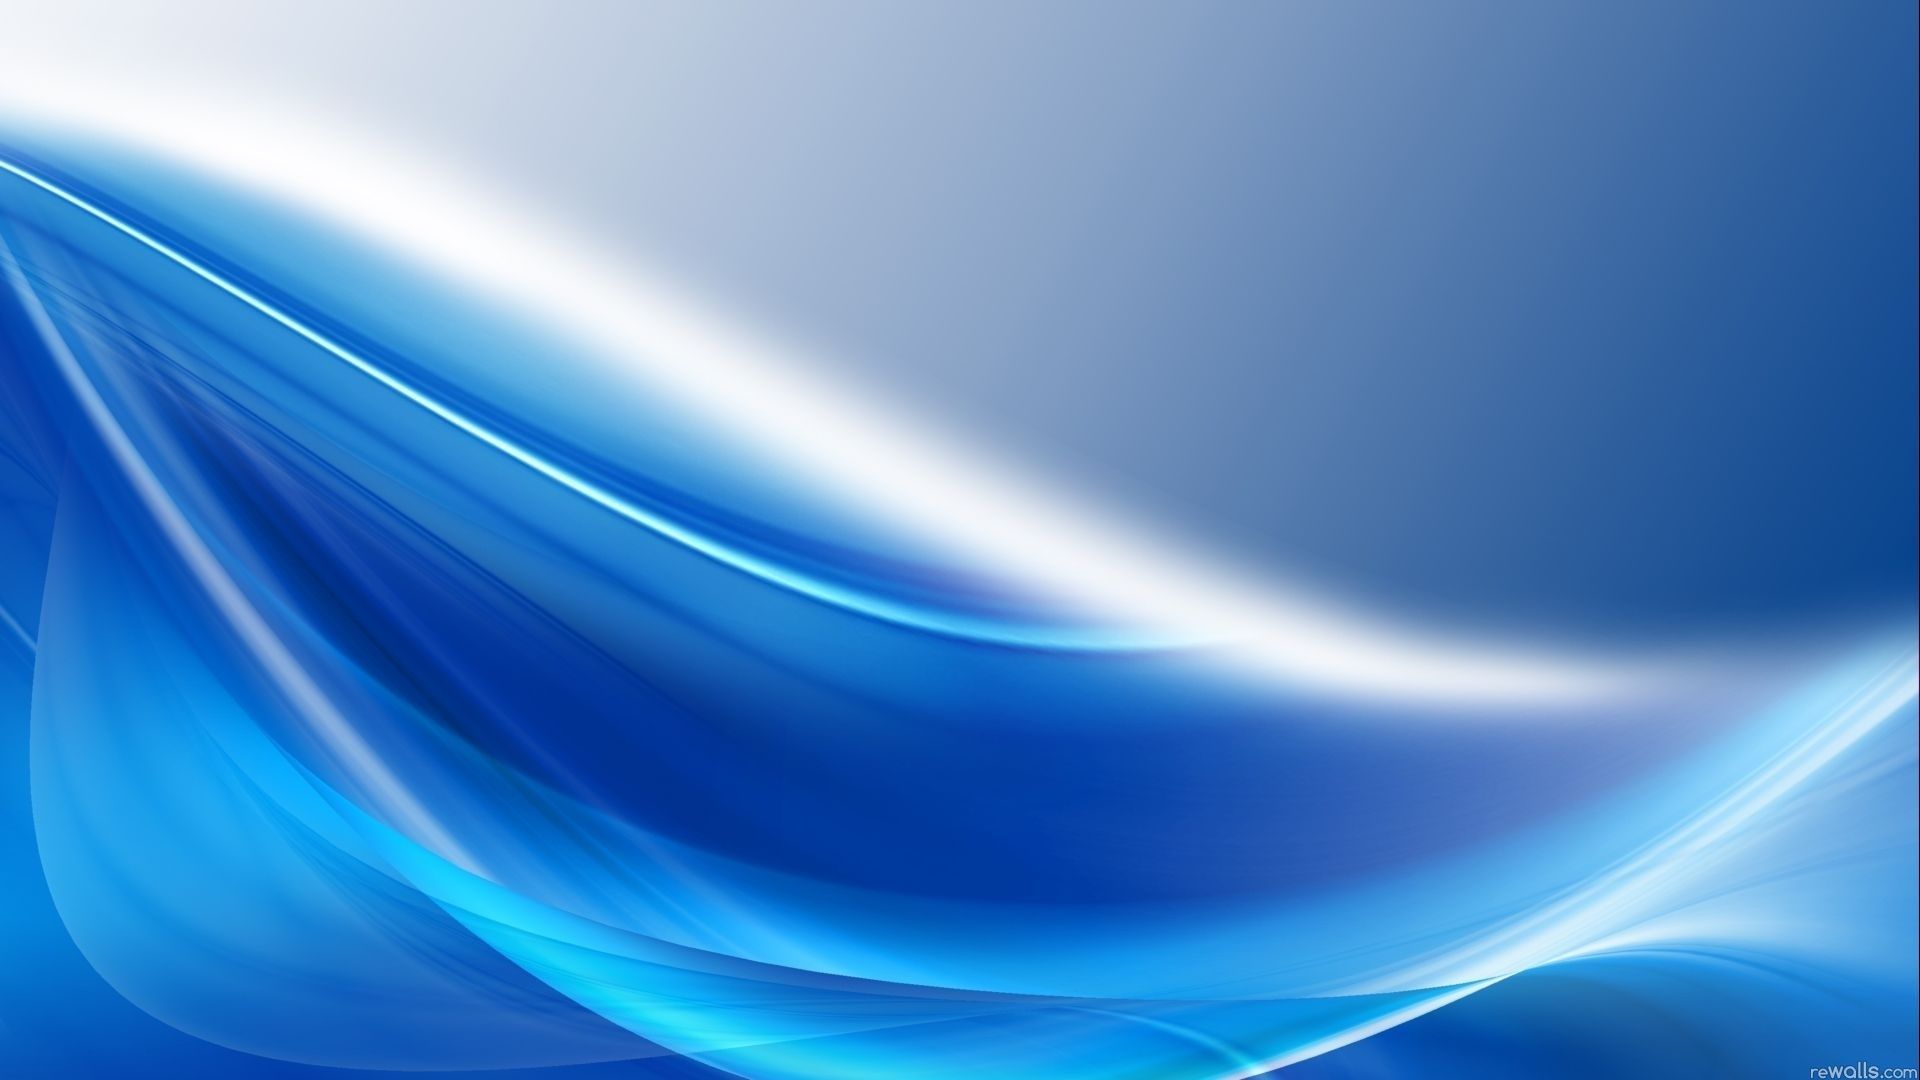 Blue Backgrounds And Abstract Background For Presentations 